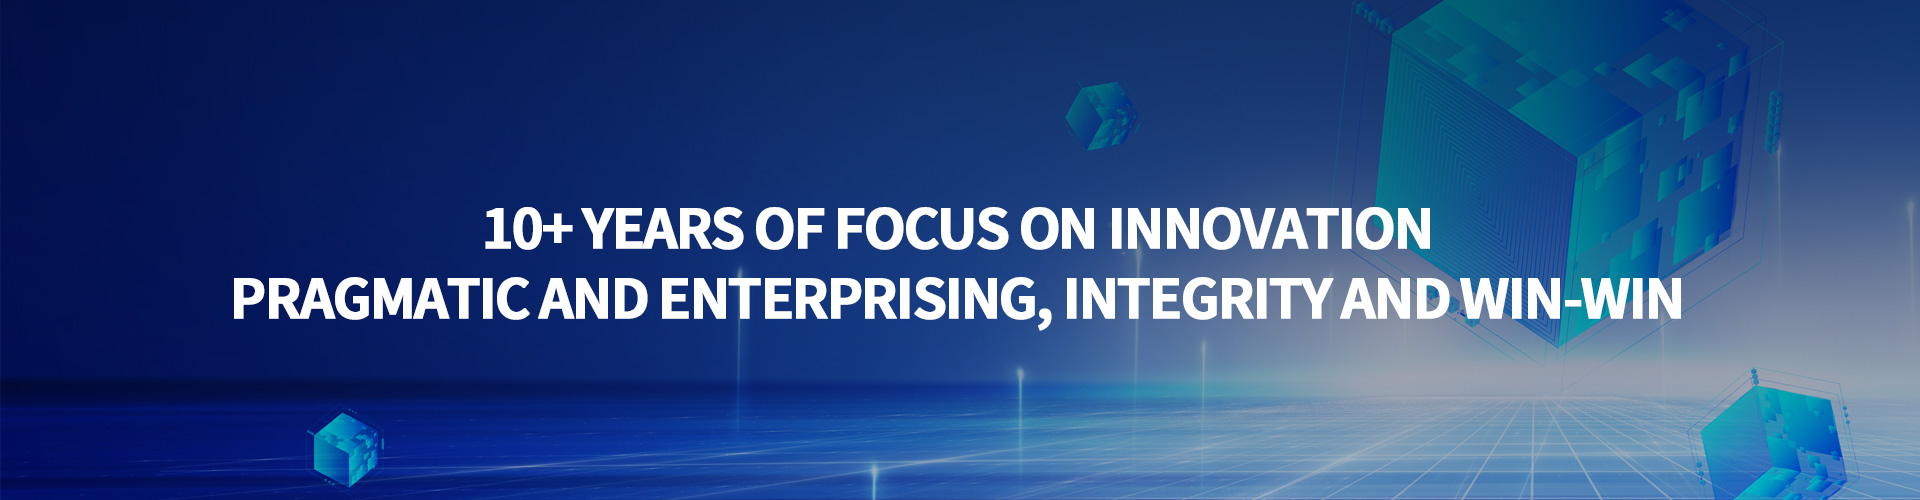 10+ years of focus on innovation  Pragmatic and enterprising, integrity and win-win